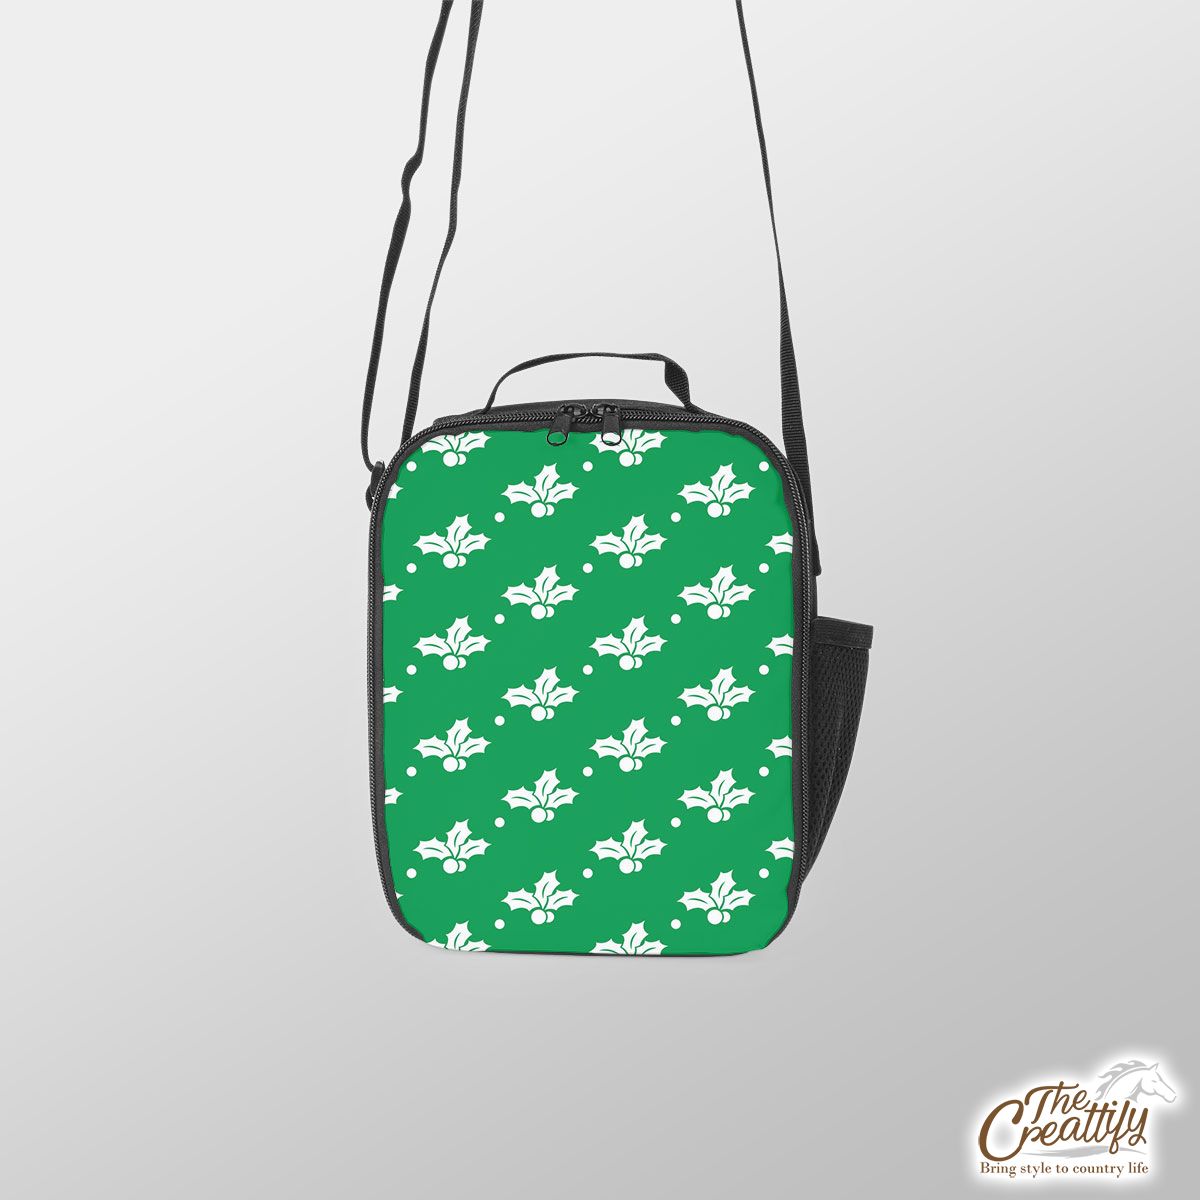 Holly Tree Pattern, Holly Leaf, American Holly Tree On Green Lunch Box Bag